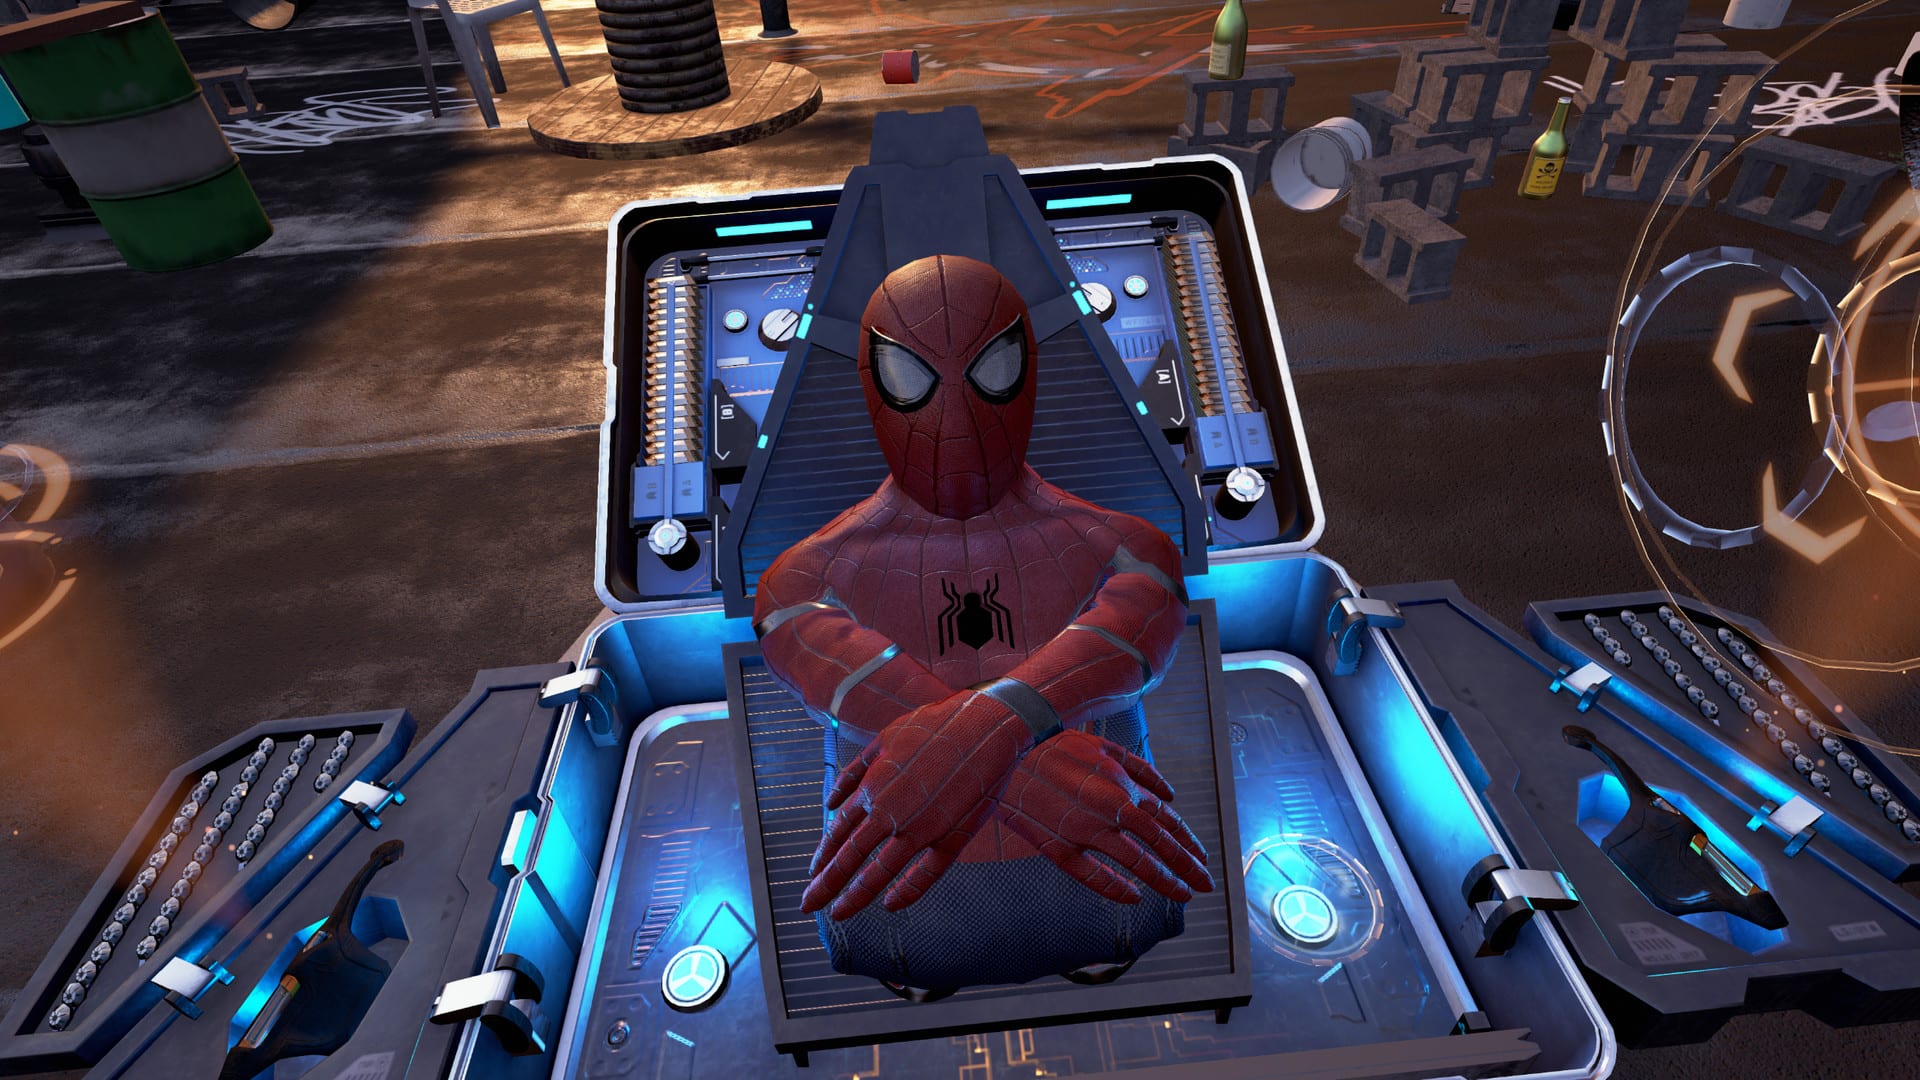 Review: Spider-Man: Homecoming PSVR Experience - PS4/PSVR